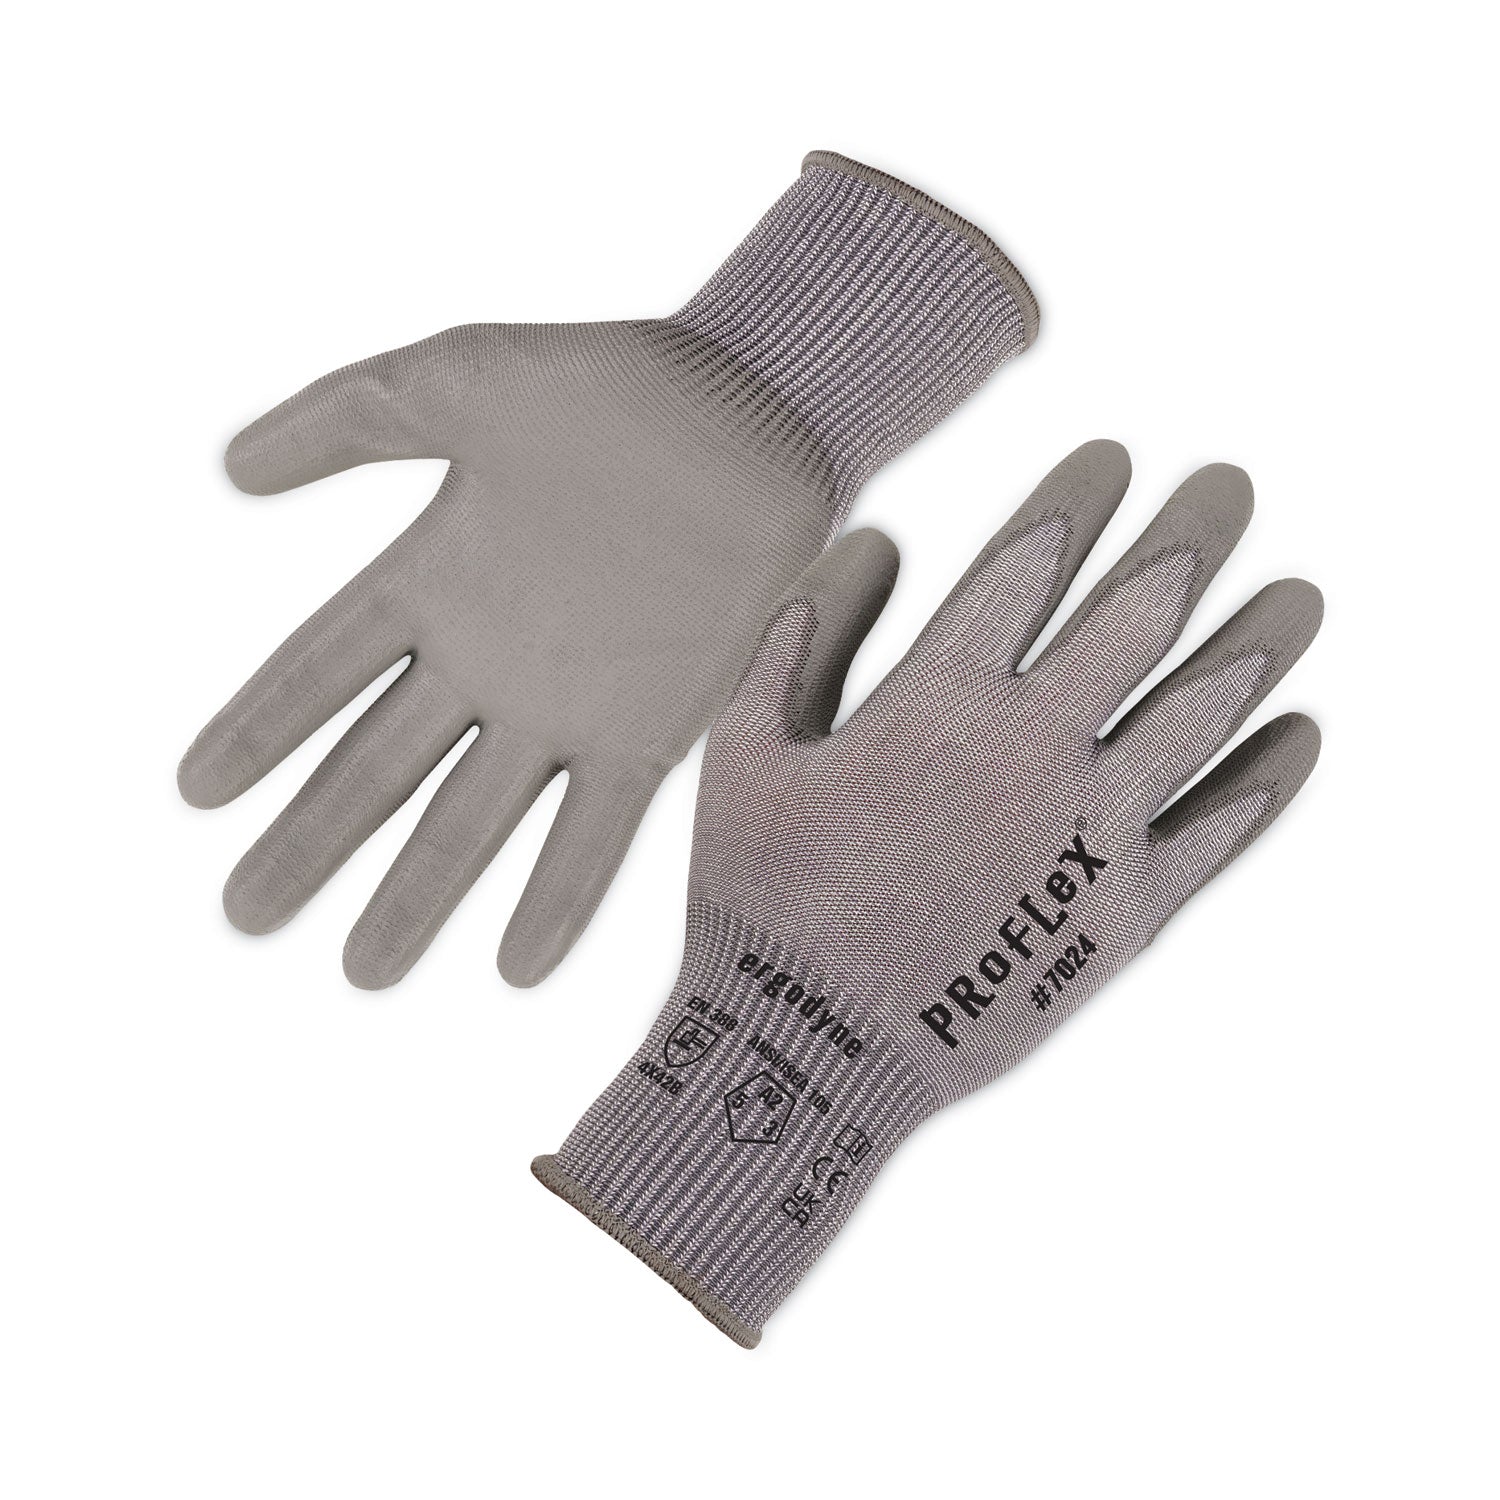 proflex-7024-ansi-a2-pu-coated-cr-gloves-gray-large-12-pairs-pack-ships-in-1-3-business-days_ego10394 - 1